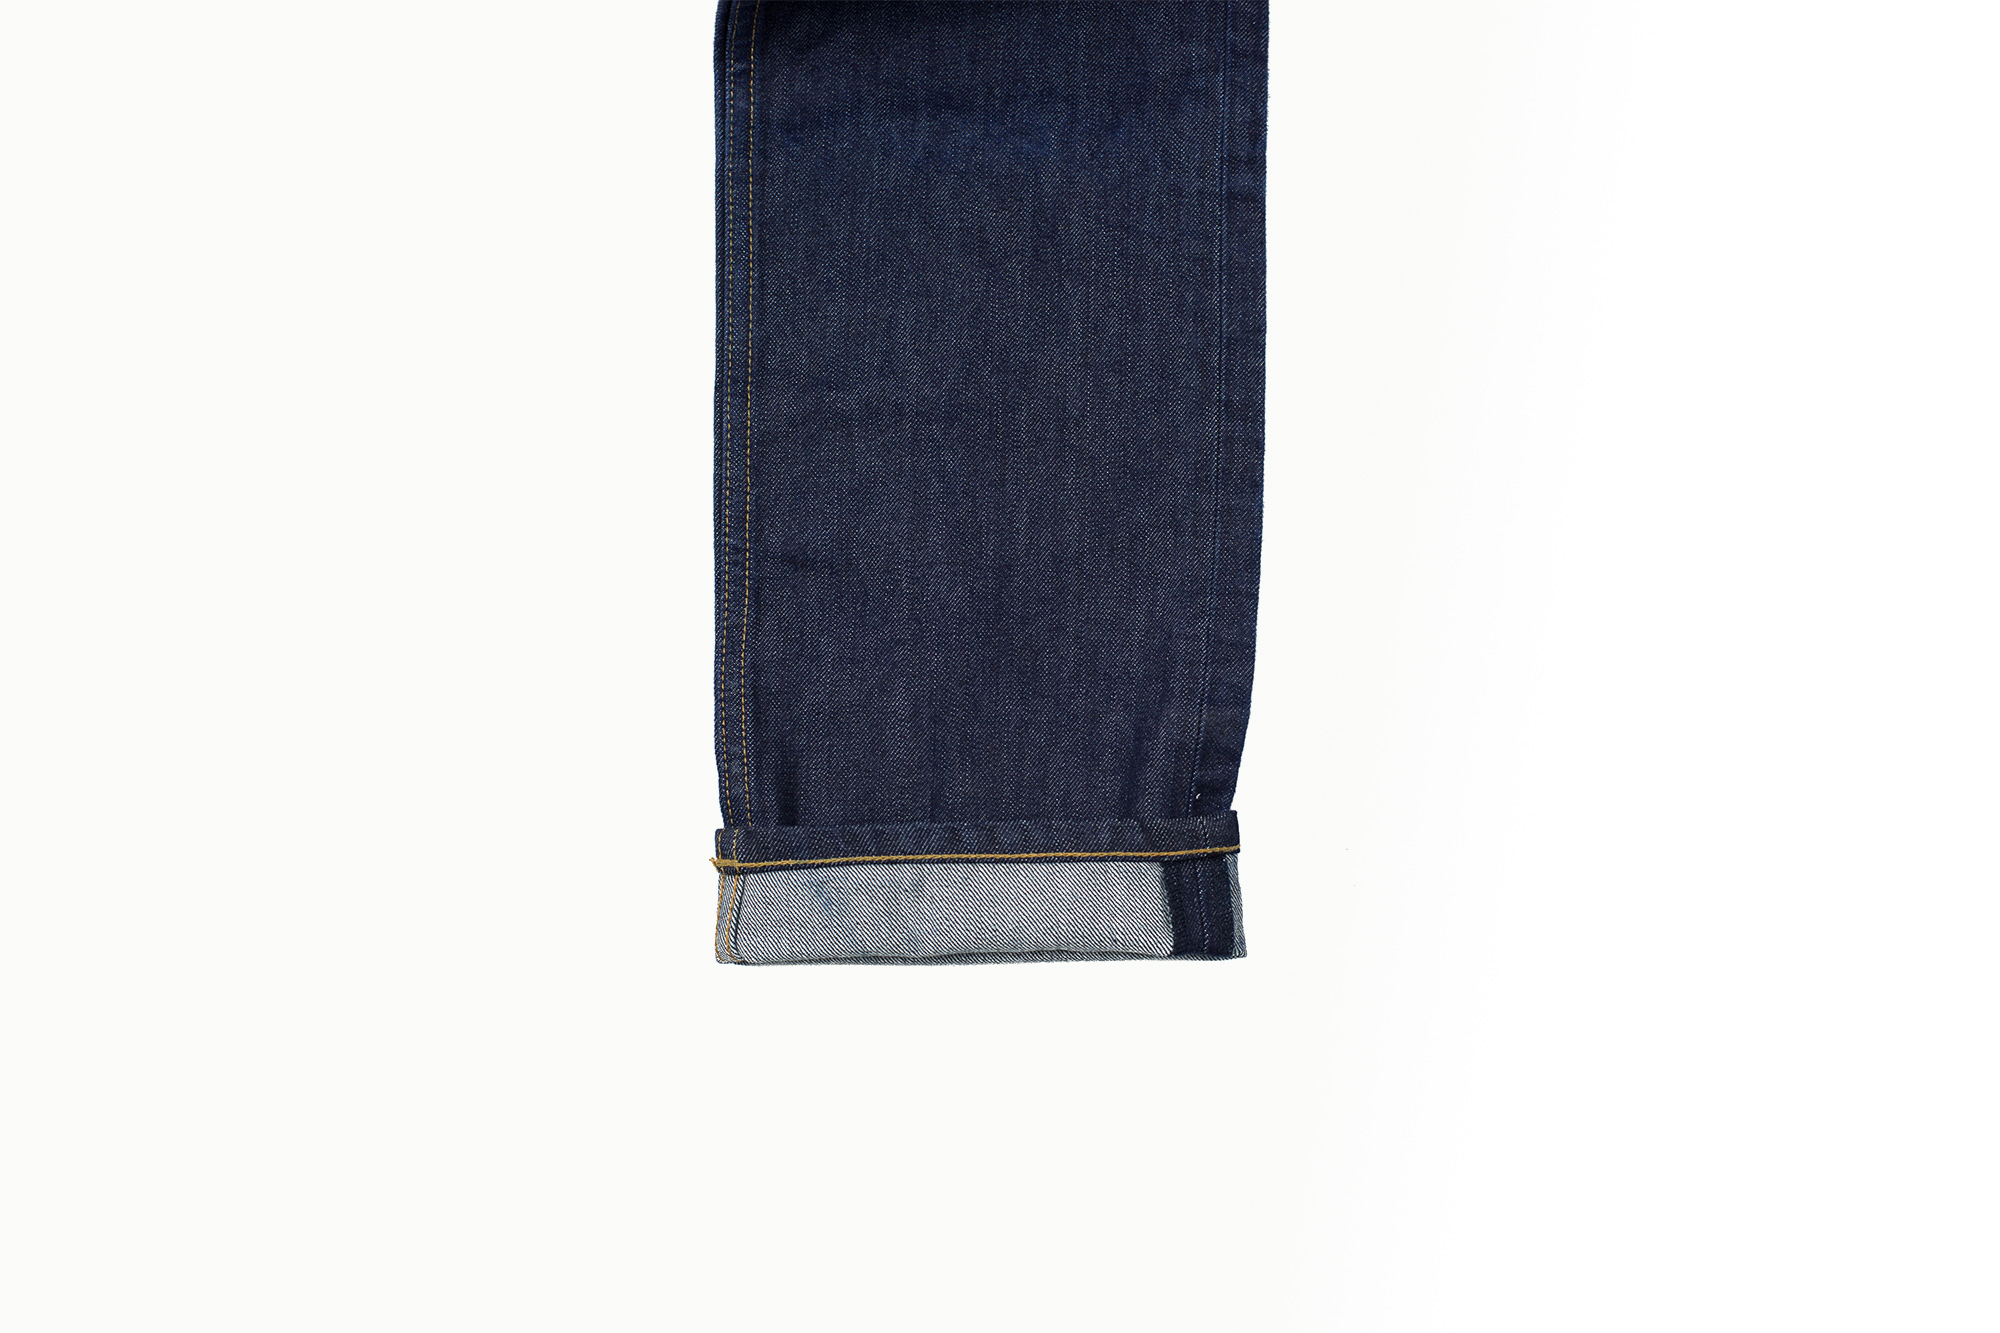 Left Field’s New Jeans Are a Non-Selvedge White Oak Steal